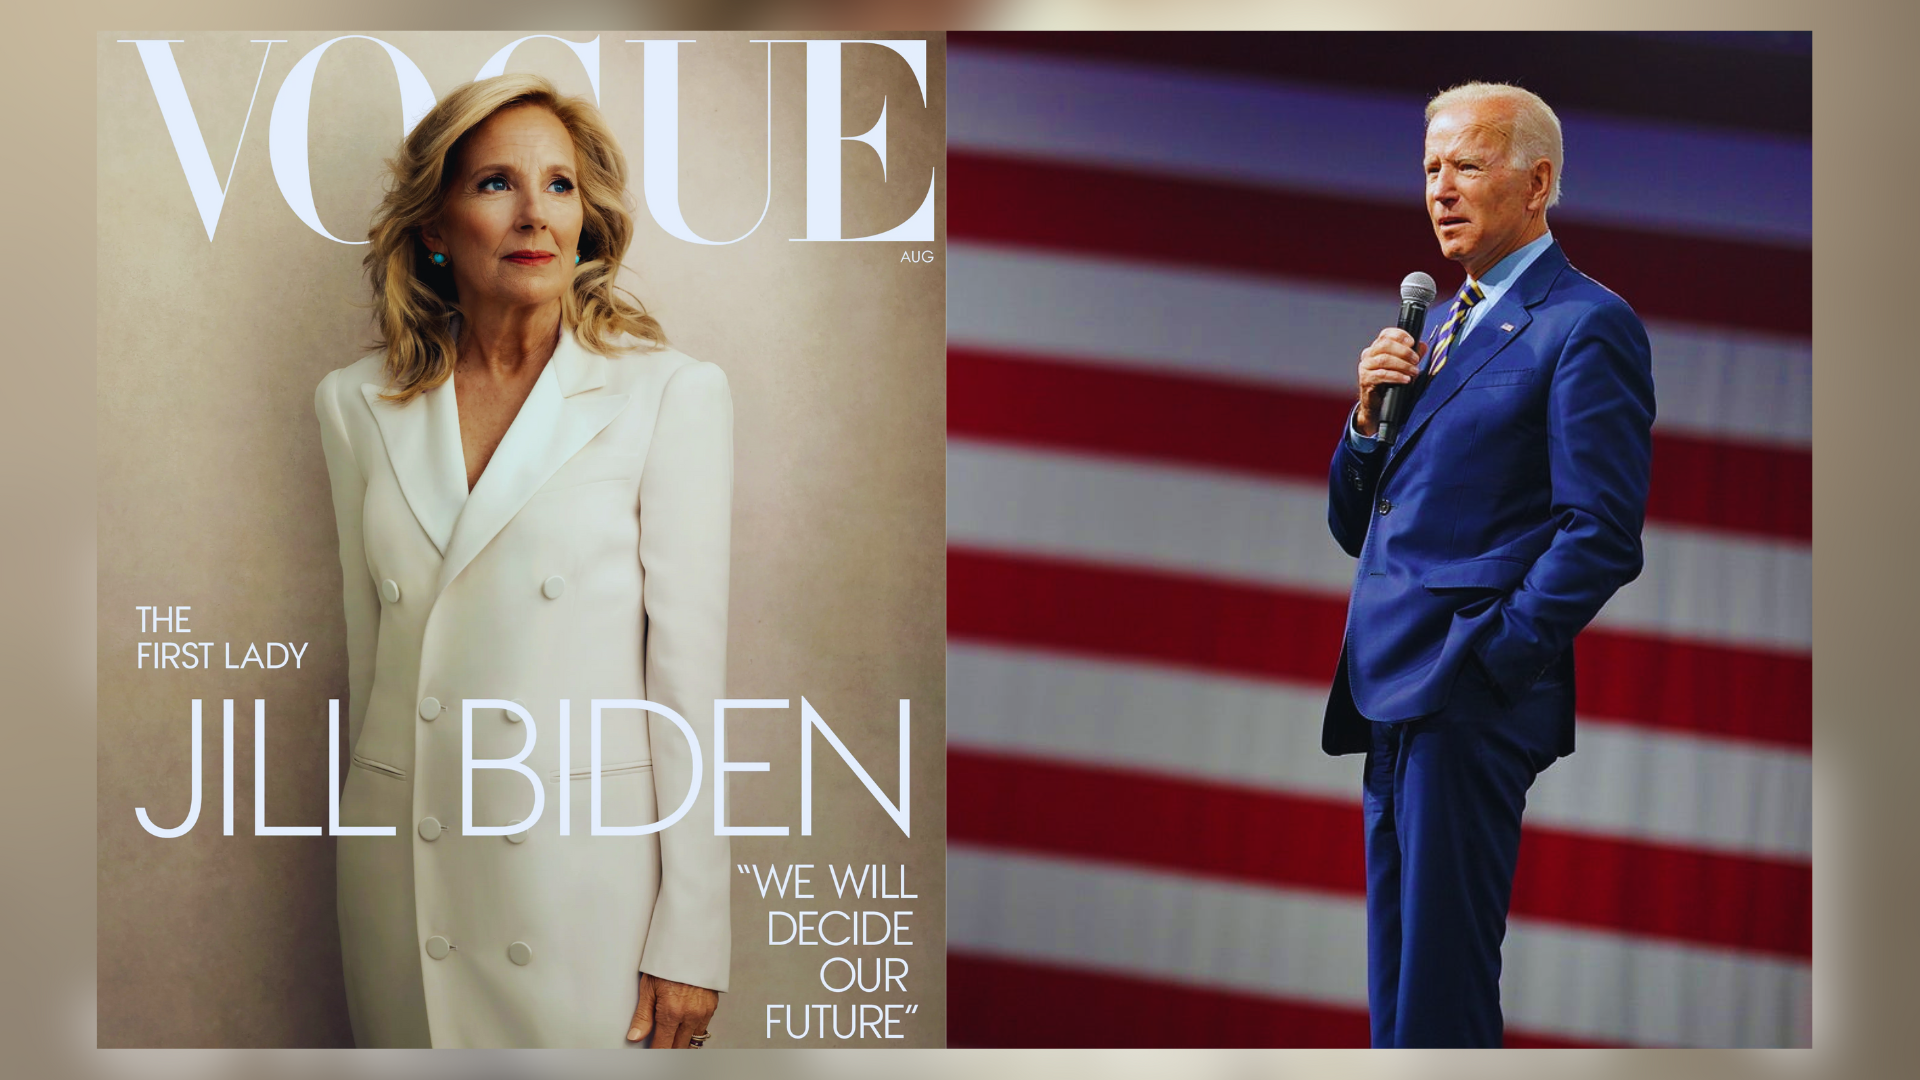 First Lady Jill Biden Faces Backlash Over Vogue Cover, Stands By Biden’s Presidency Amid Debate Fallout